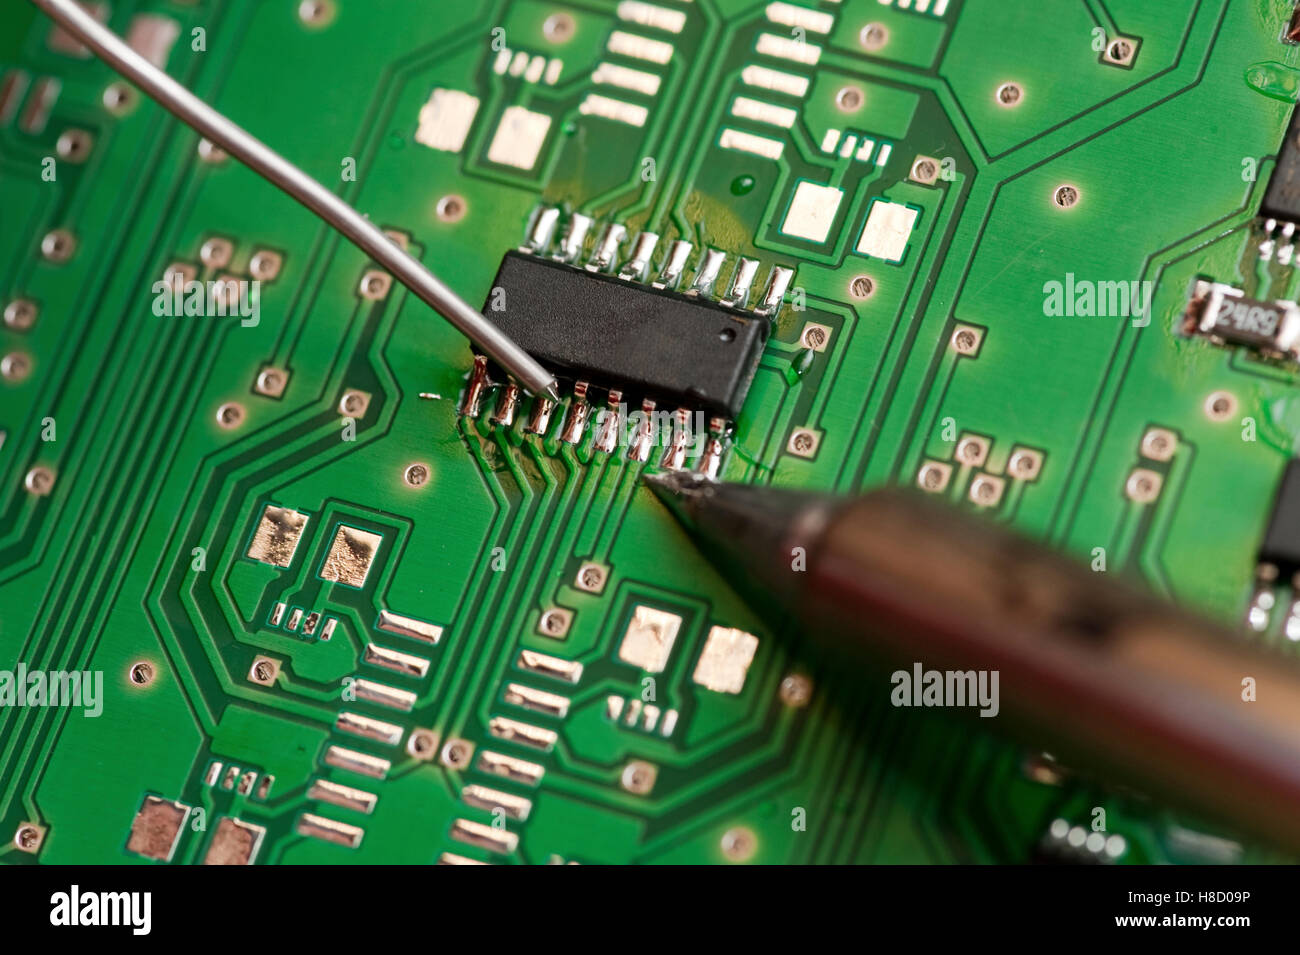 Soldering an electronic component on a printed circuit board Stock Photo